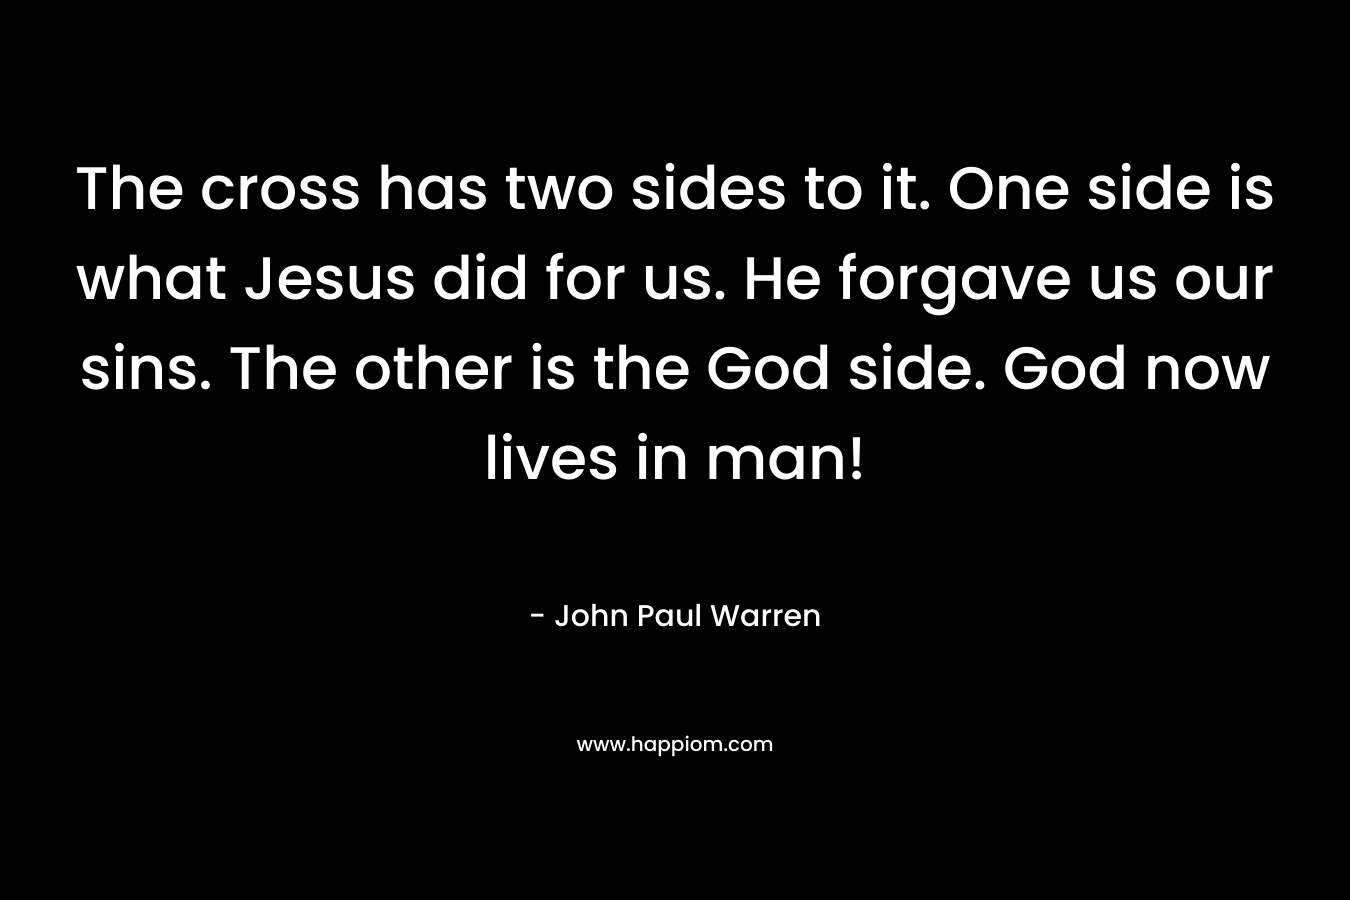 The cross has two sides to it. One side is what Jesus did for us. He forgave us our sins. The other is the God side. God now lives in man!